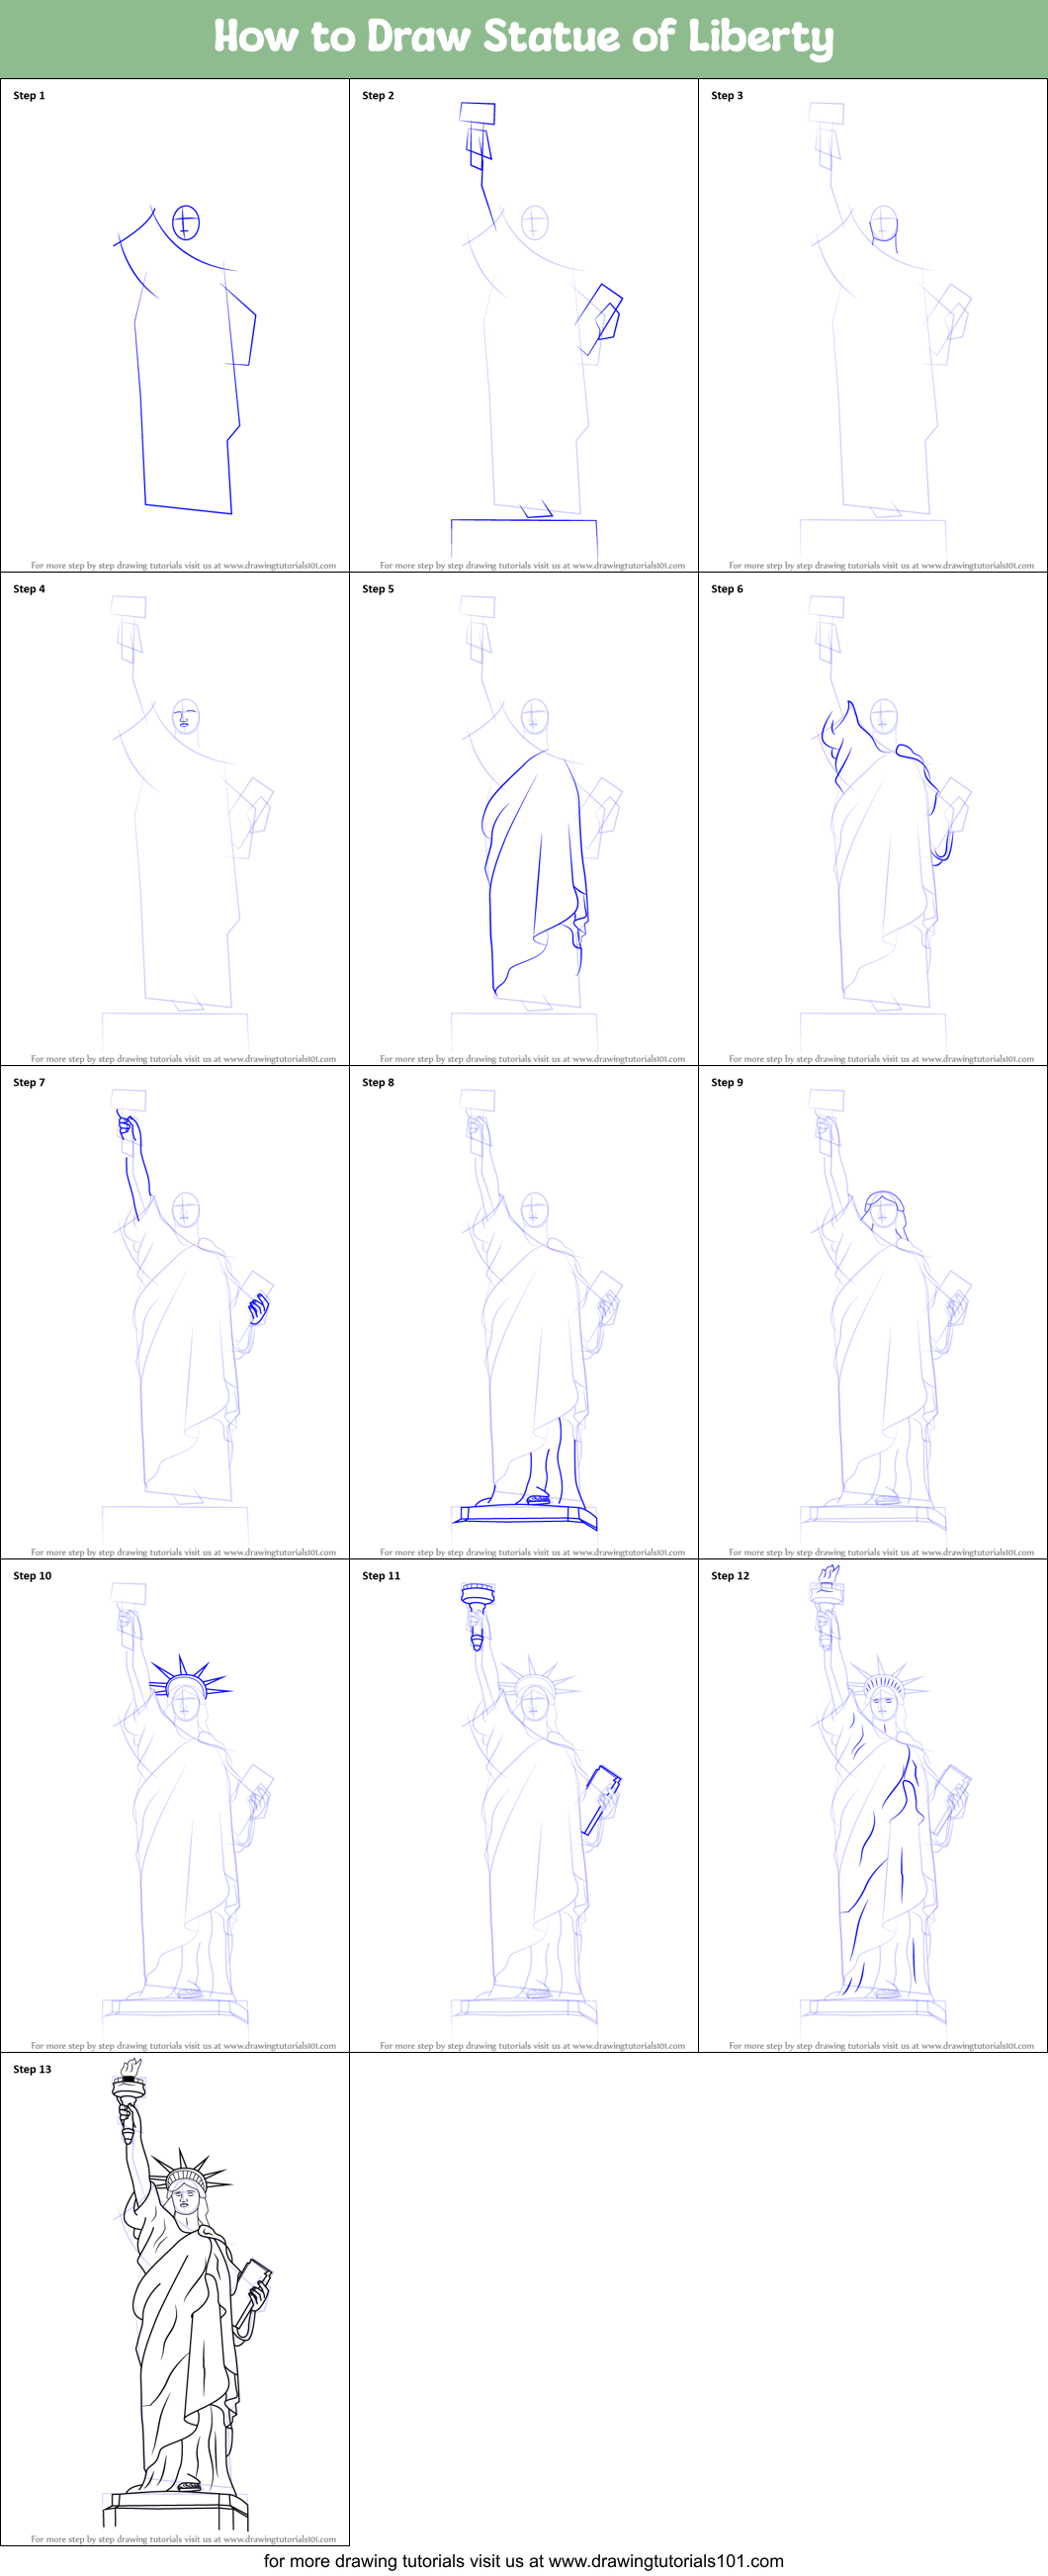 How to Draw Statue of Liberty printable step by step drawing sheet